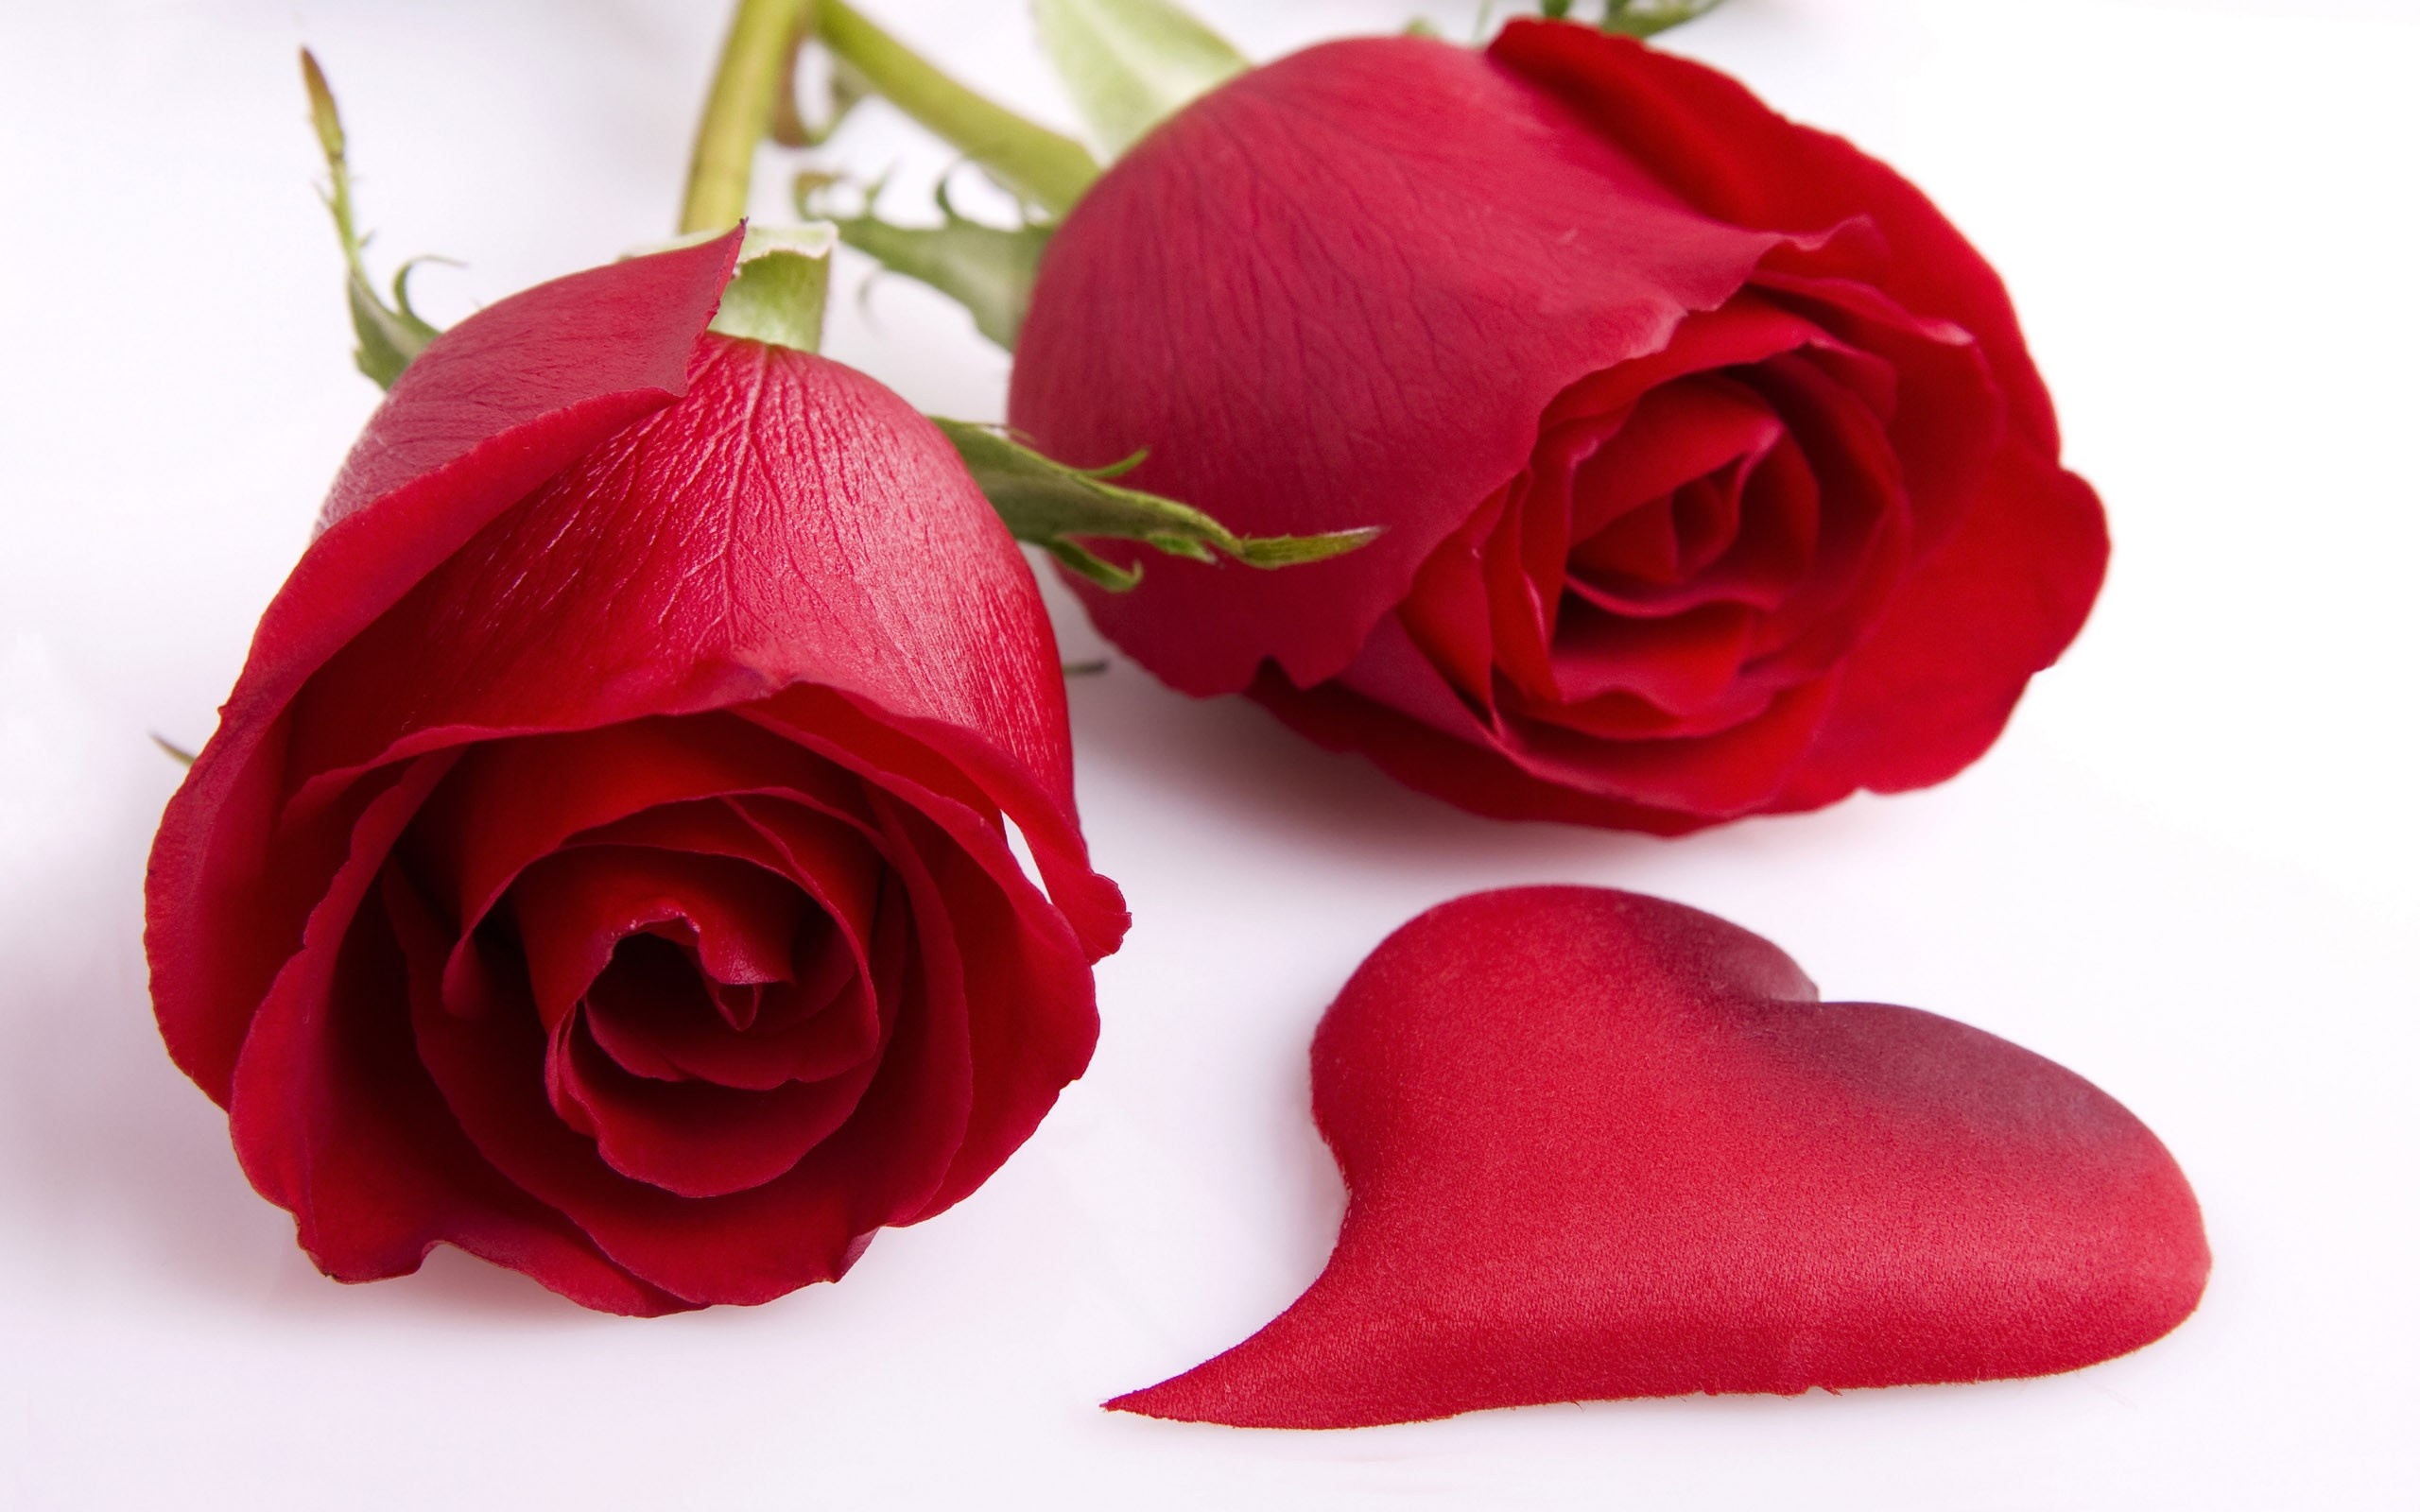 Hearts and Flowers, Love and romance, Red roses, Delicate beauty, 2560x1600 HD Desktop